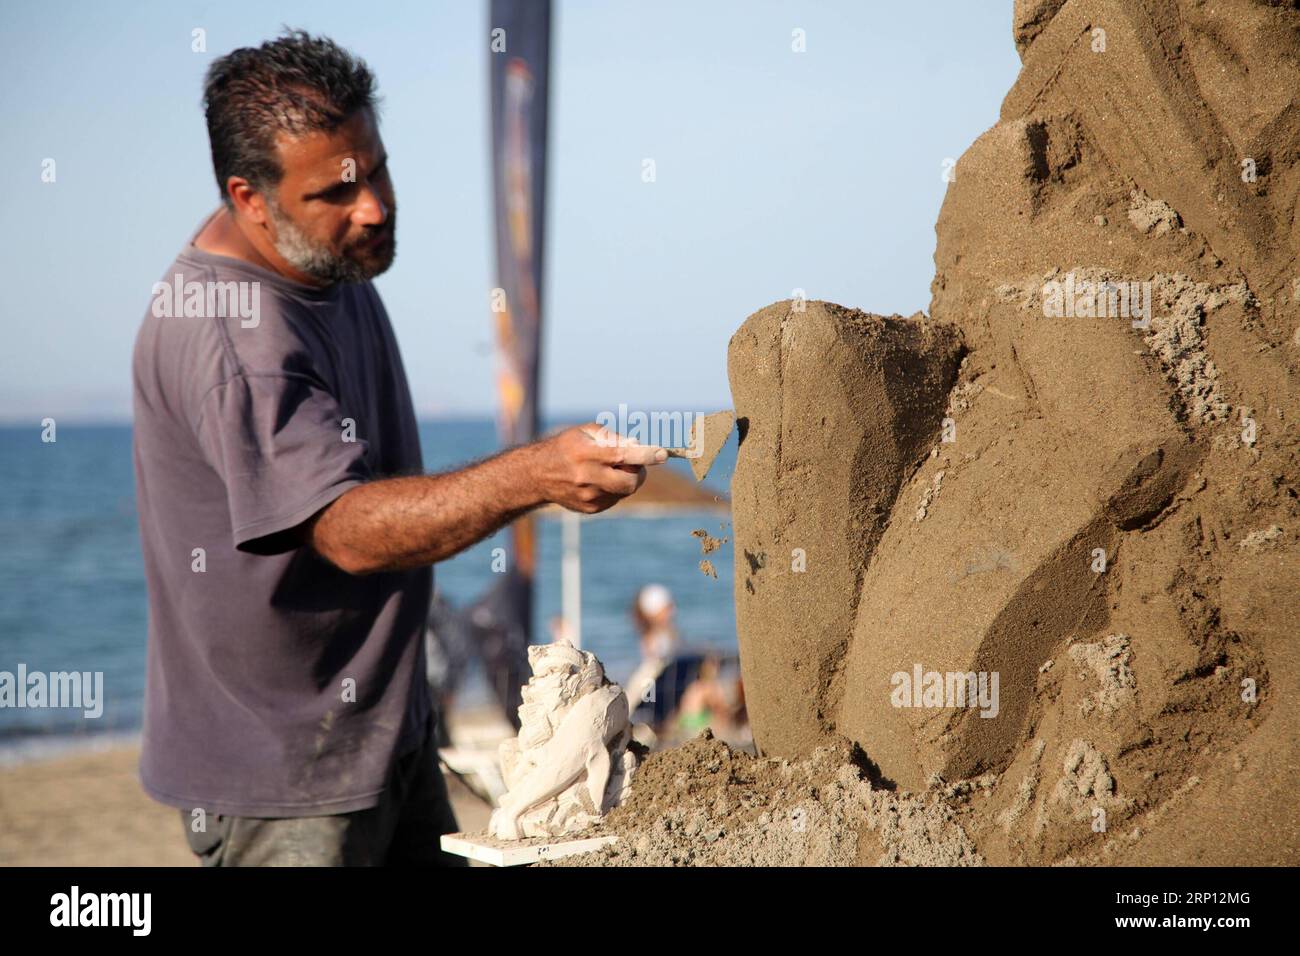 (180605) -- HERAKLION (GREECE), June 5, 2018 -- Greek sculptor Andreas Arapakis works on a sculpture at Ammoudara beach, Heraklion, Greece, June 5, 2018. Ammoudara Professional Sand Sculpting Festival is held here to raise public awareness on plastic pollution. ) GREECE-HERAKLION-SAND SCULPTING FESTIVAL StefanosxRapanis PUBLICATIONxNOTxINxCHN Stock Photo